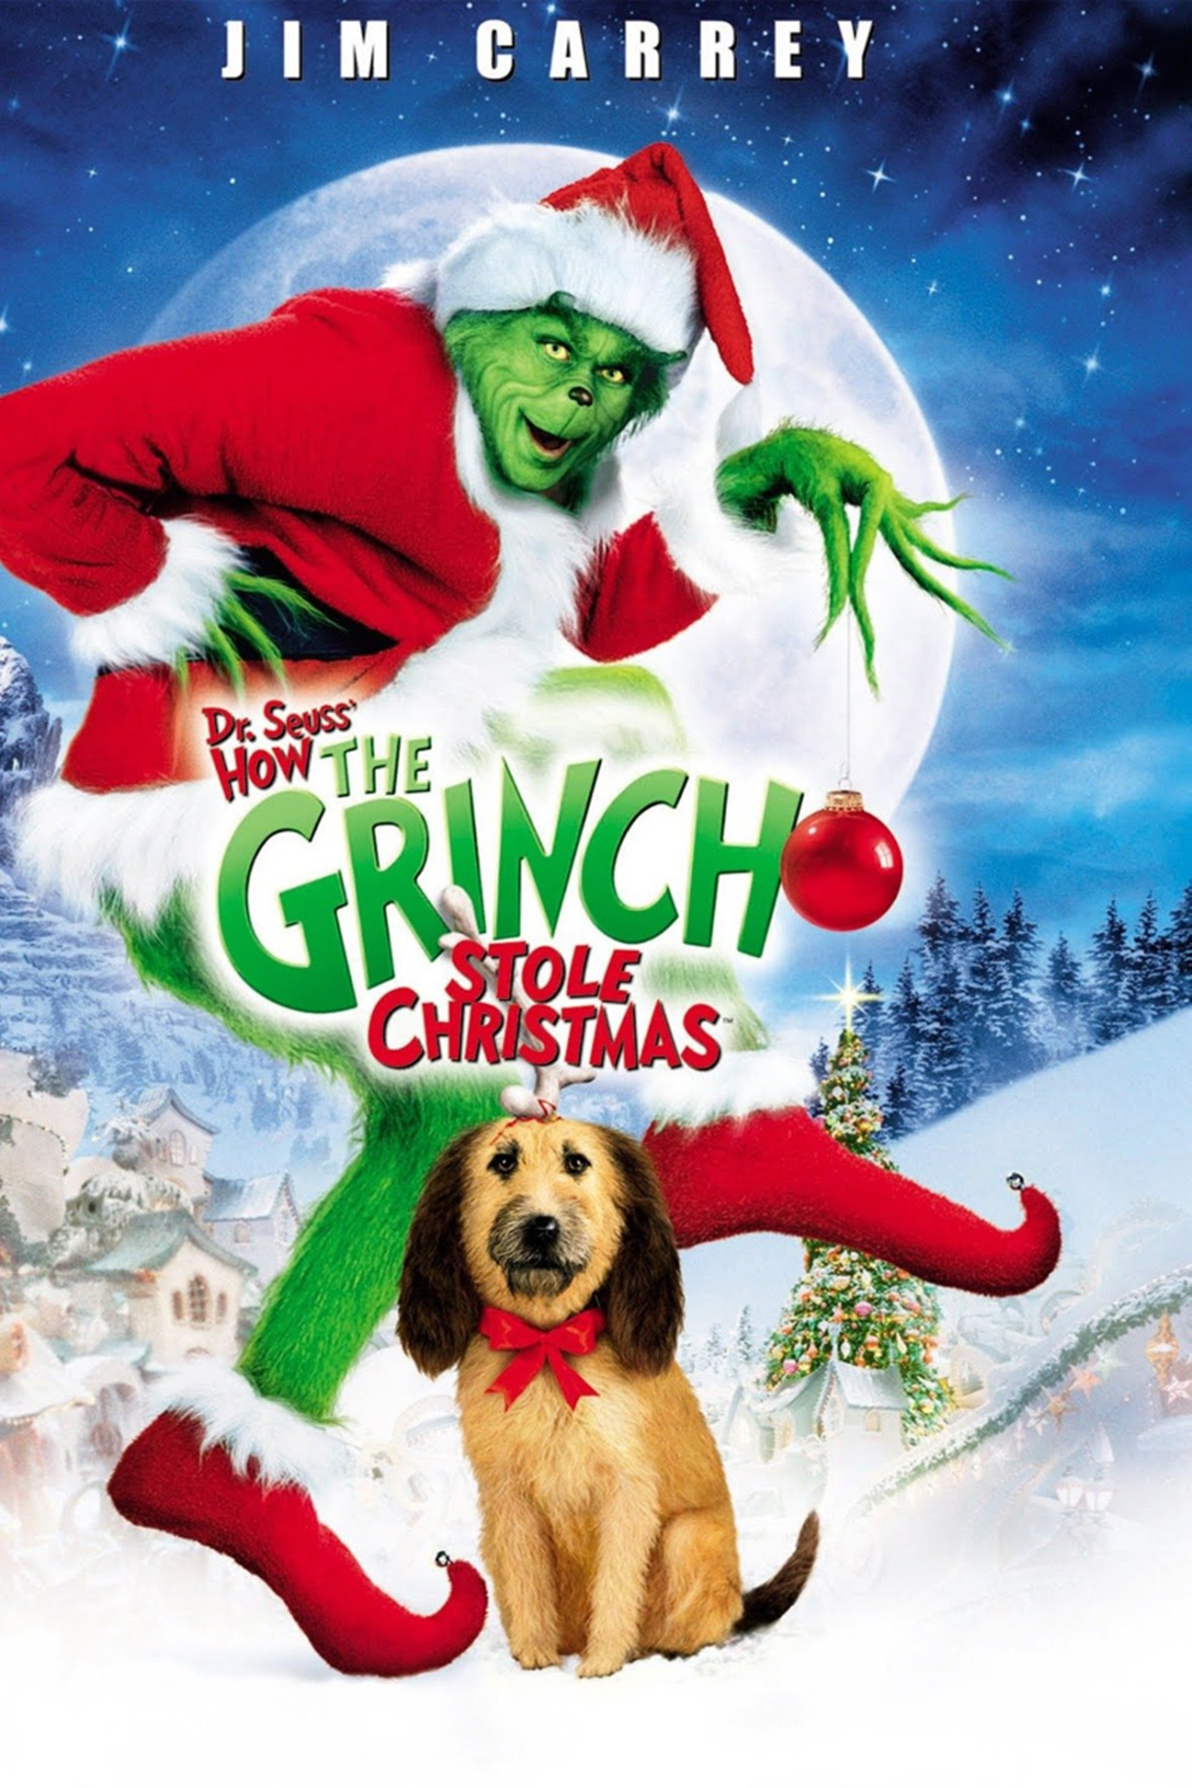 Movie cover for How the Grinch Stole Christmas starring Jim Carrey